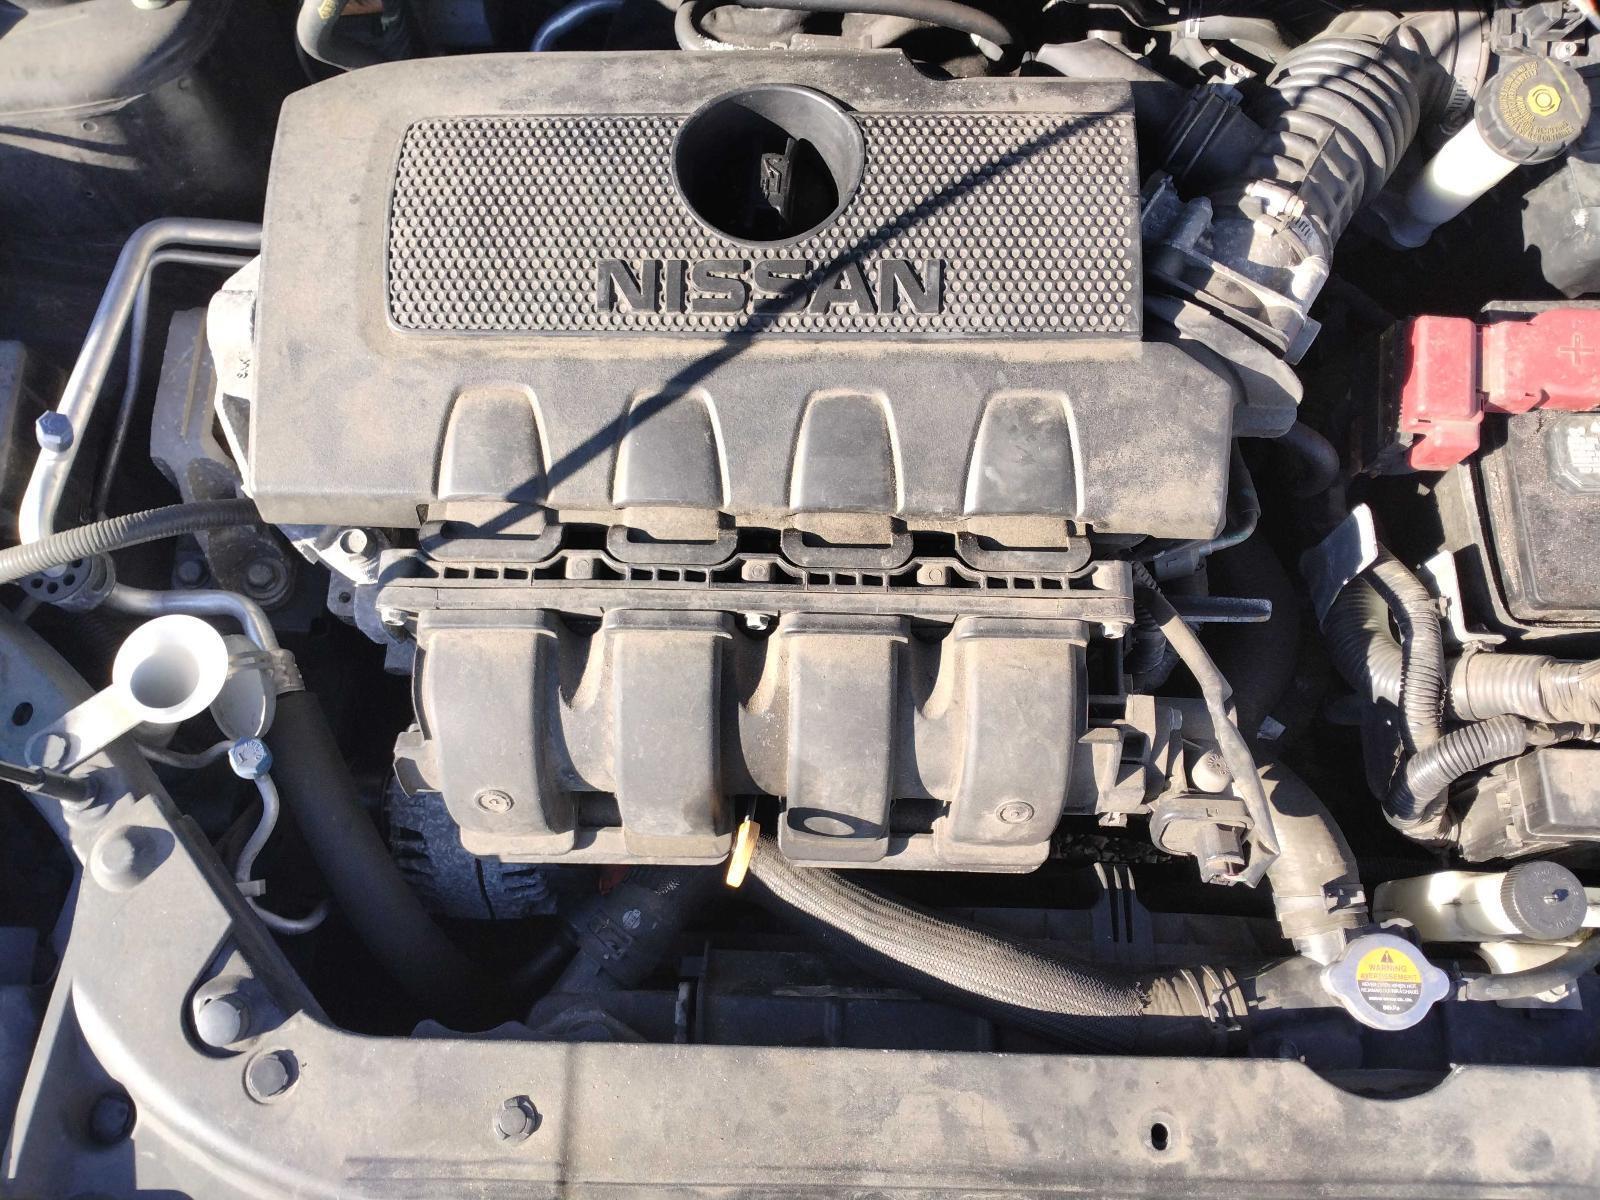 Used Engine Assembly fits: 2019 Nissan Sentra 1.8L VIN A 4th digit MR18